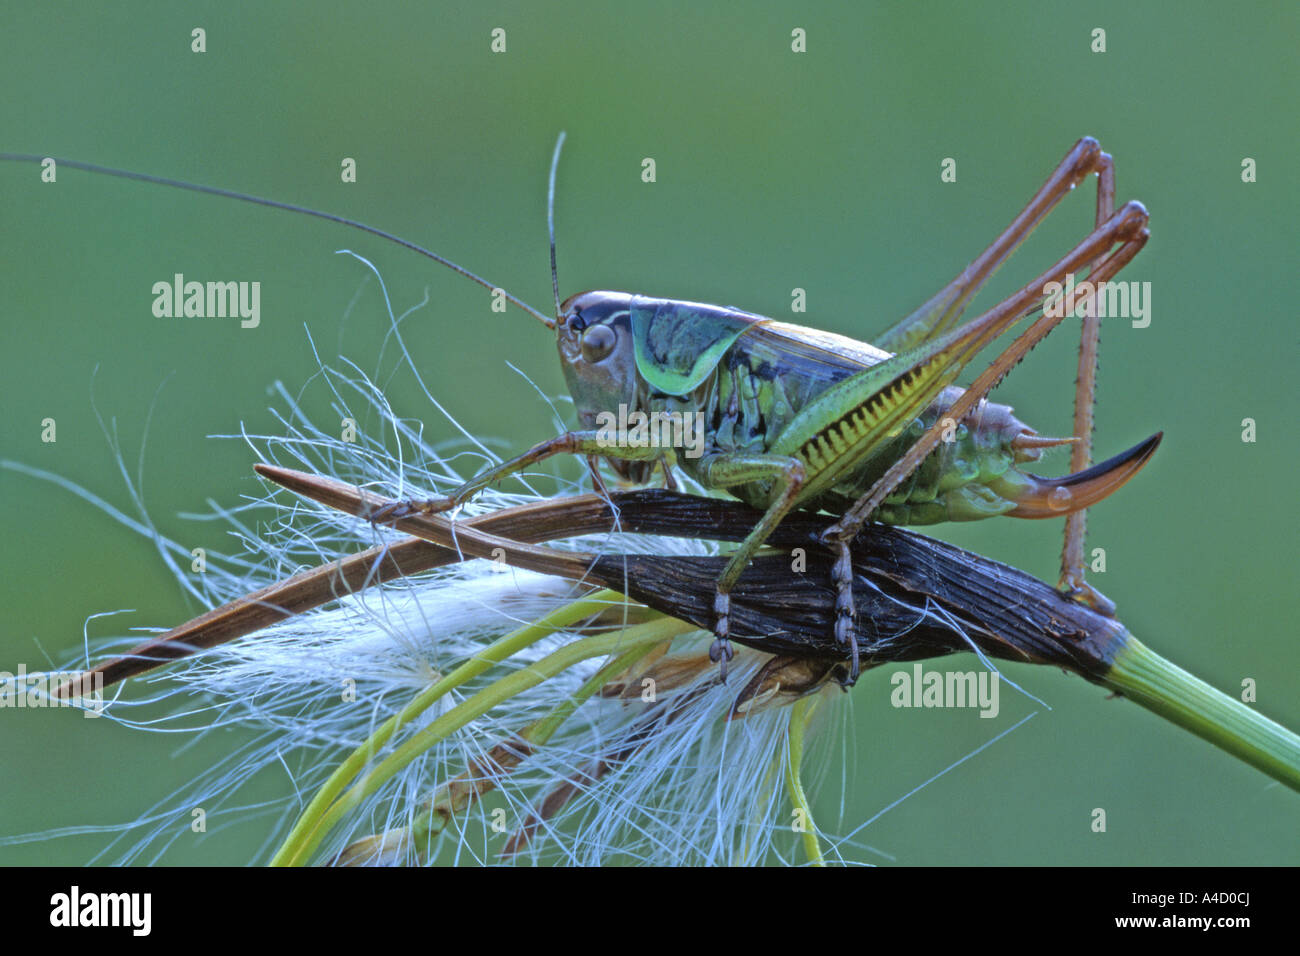 Roesels Bushcricket (Metrioptera roeseli) on a seed head. Austria, June Stock Photo